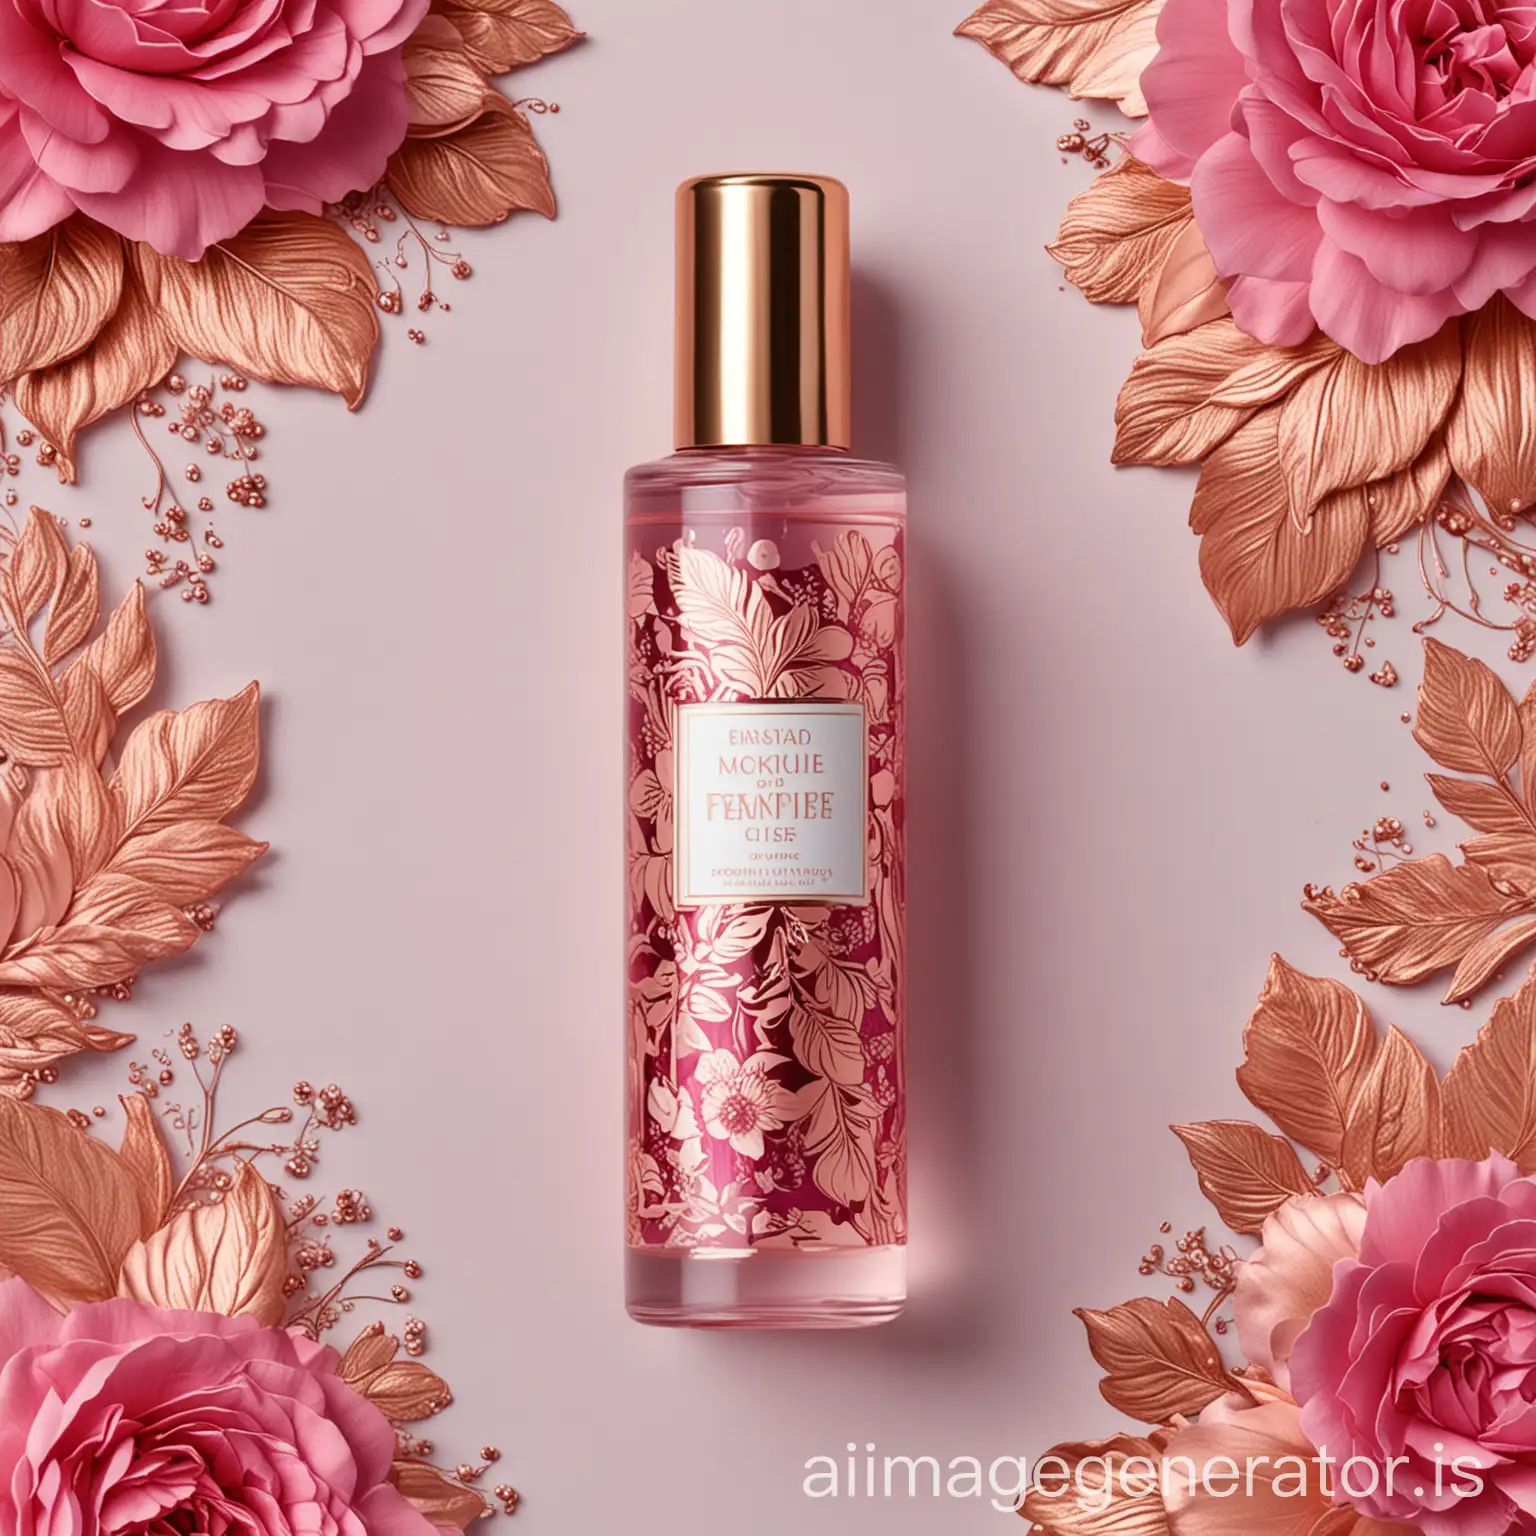 unique body mist perfume label with shocking pink and rose gold floral theme